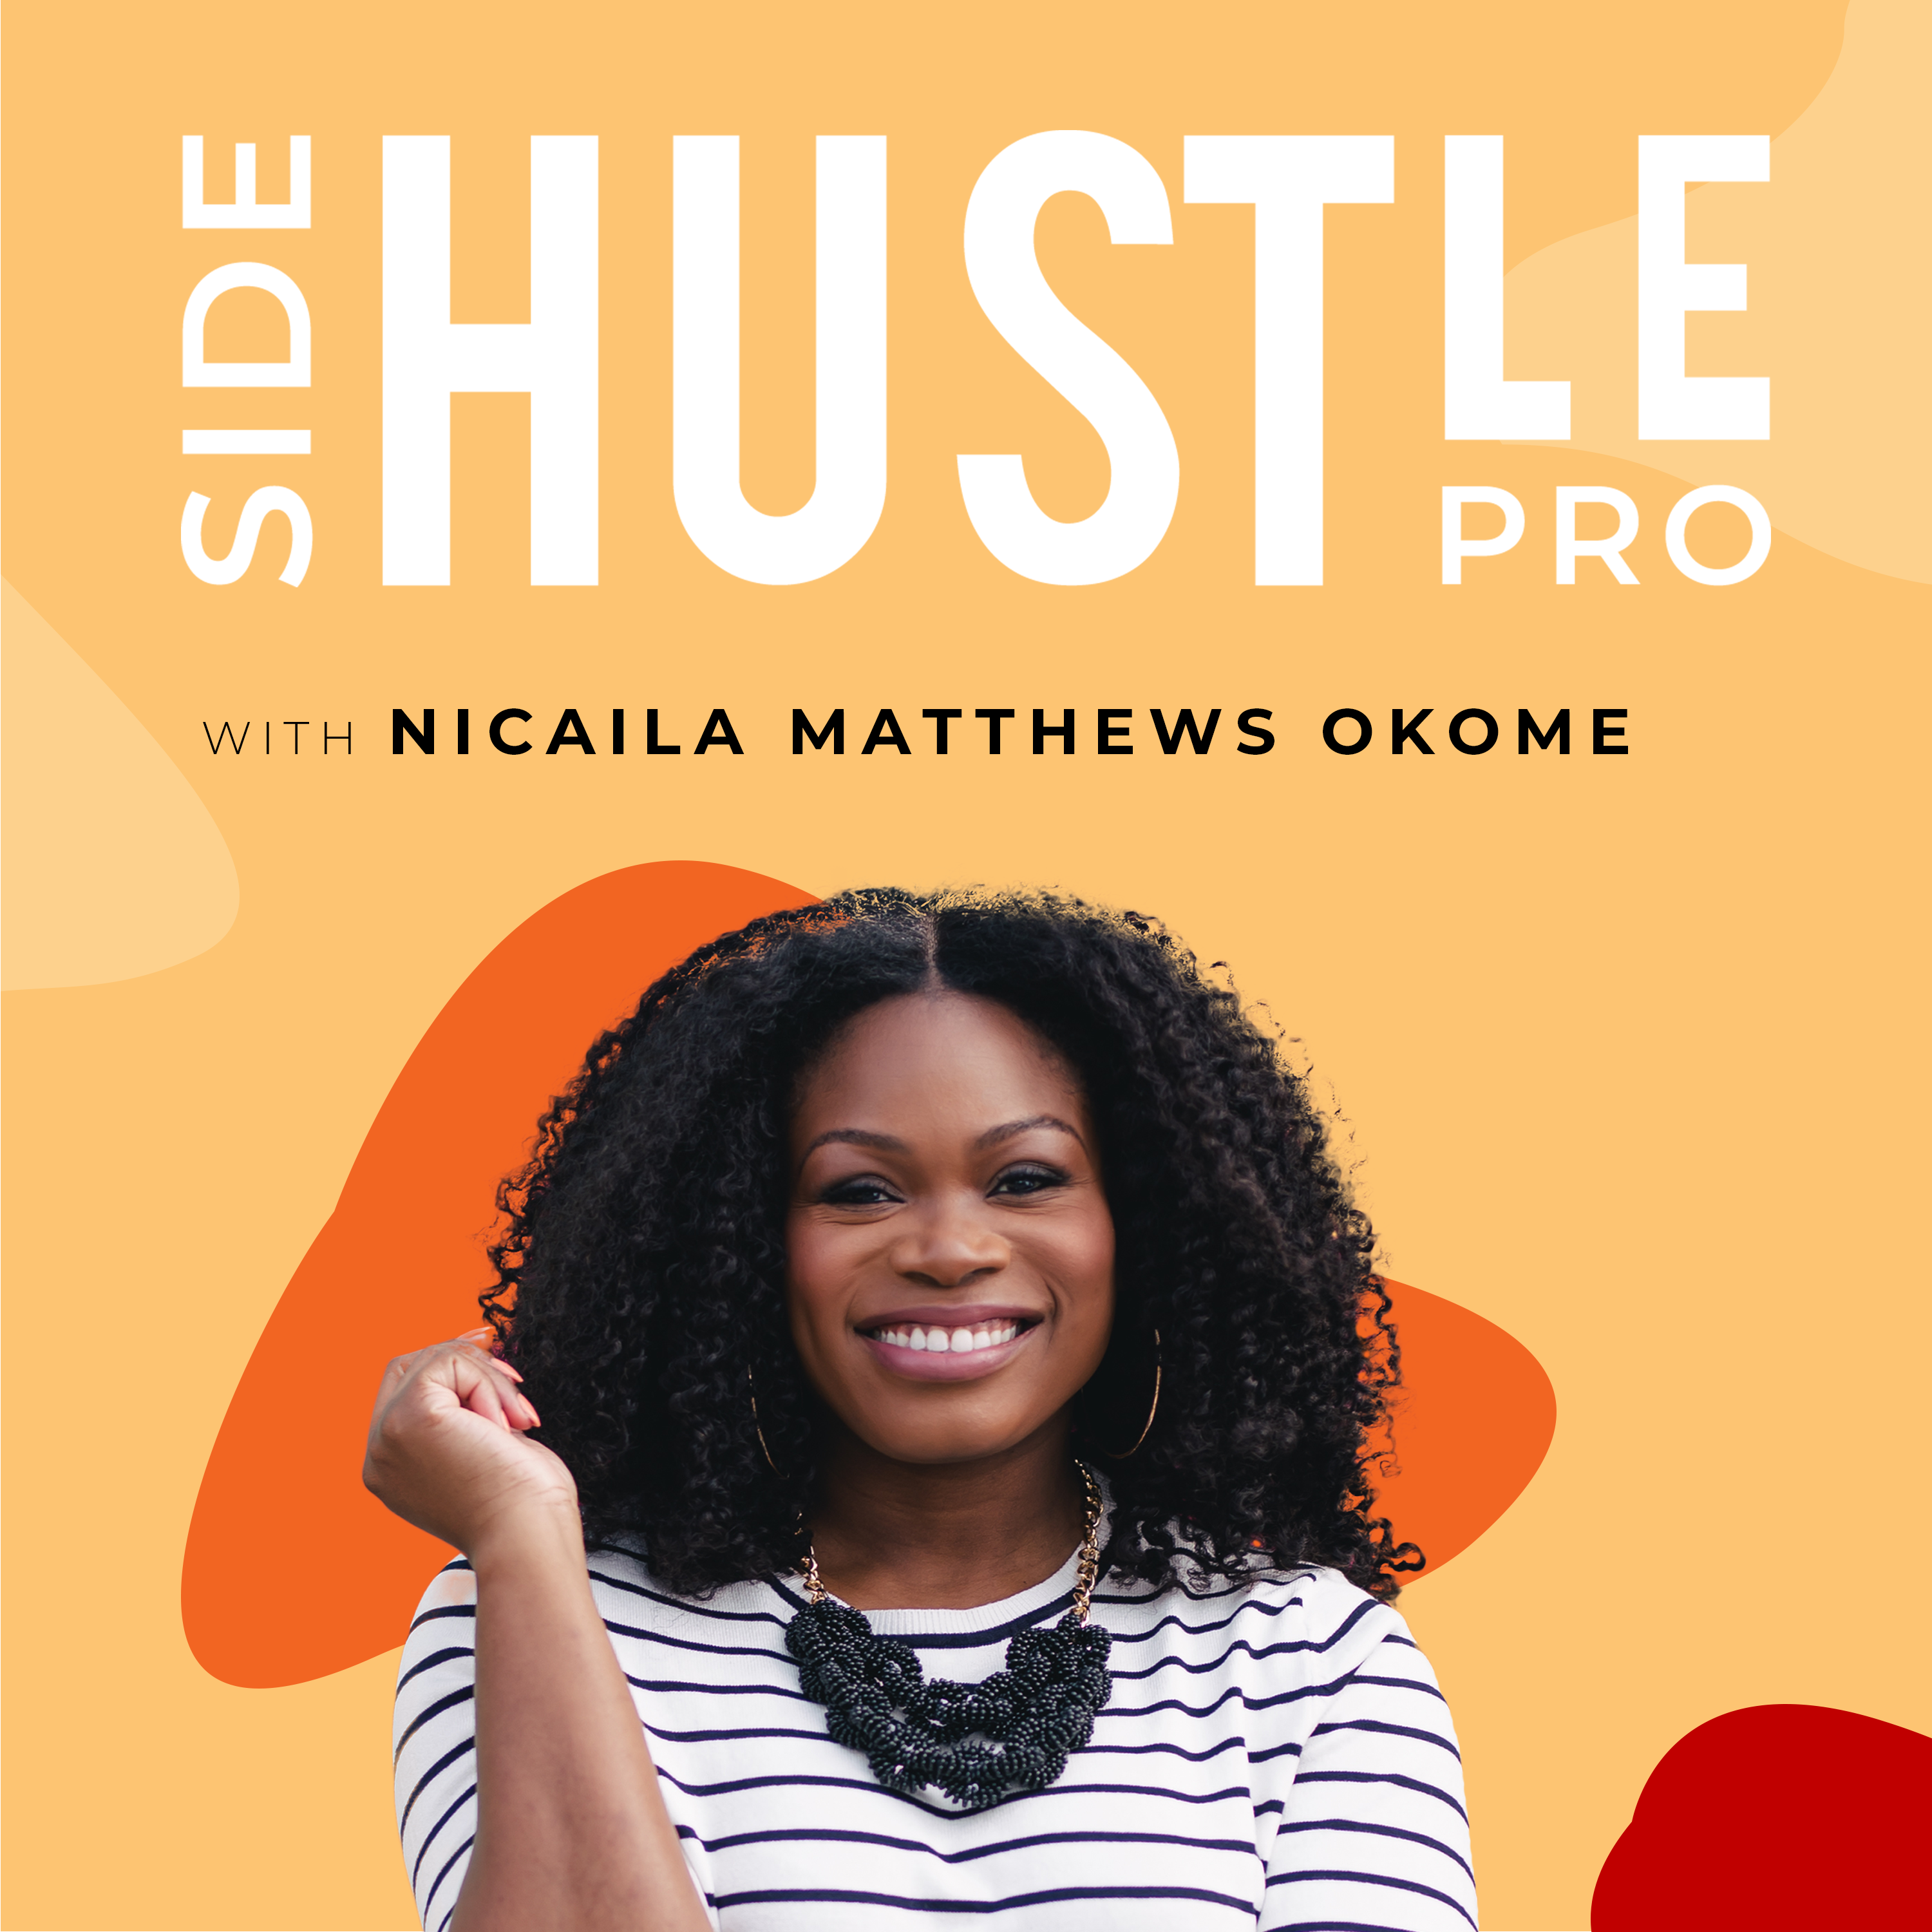 252: 7 Side Hustle Tips for Side Hustling When You Don’t Have a Lot of Time